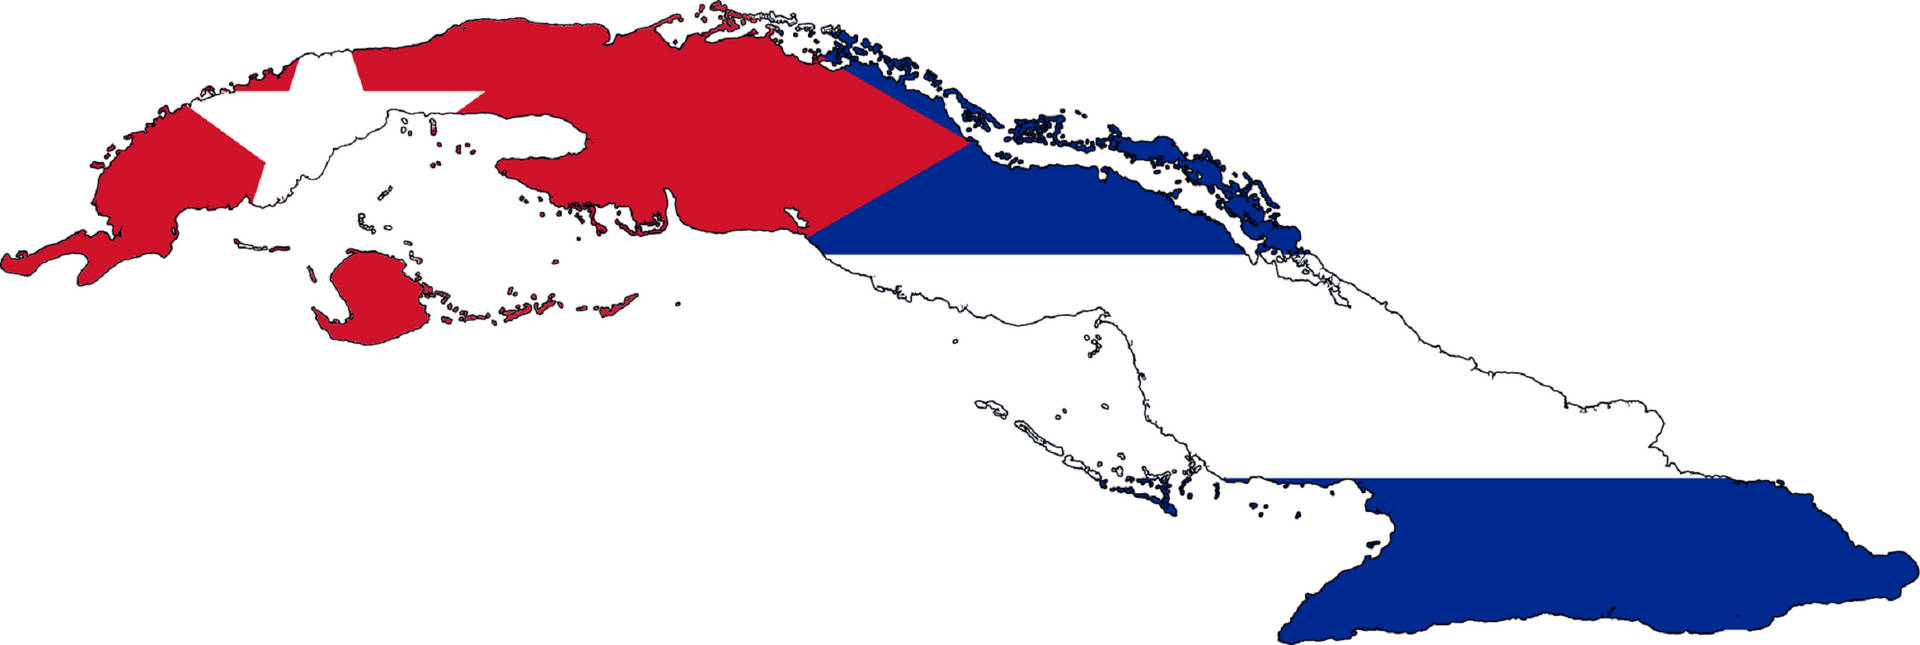 Cuban Flag And Map Widescreen